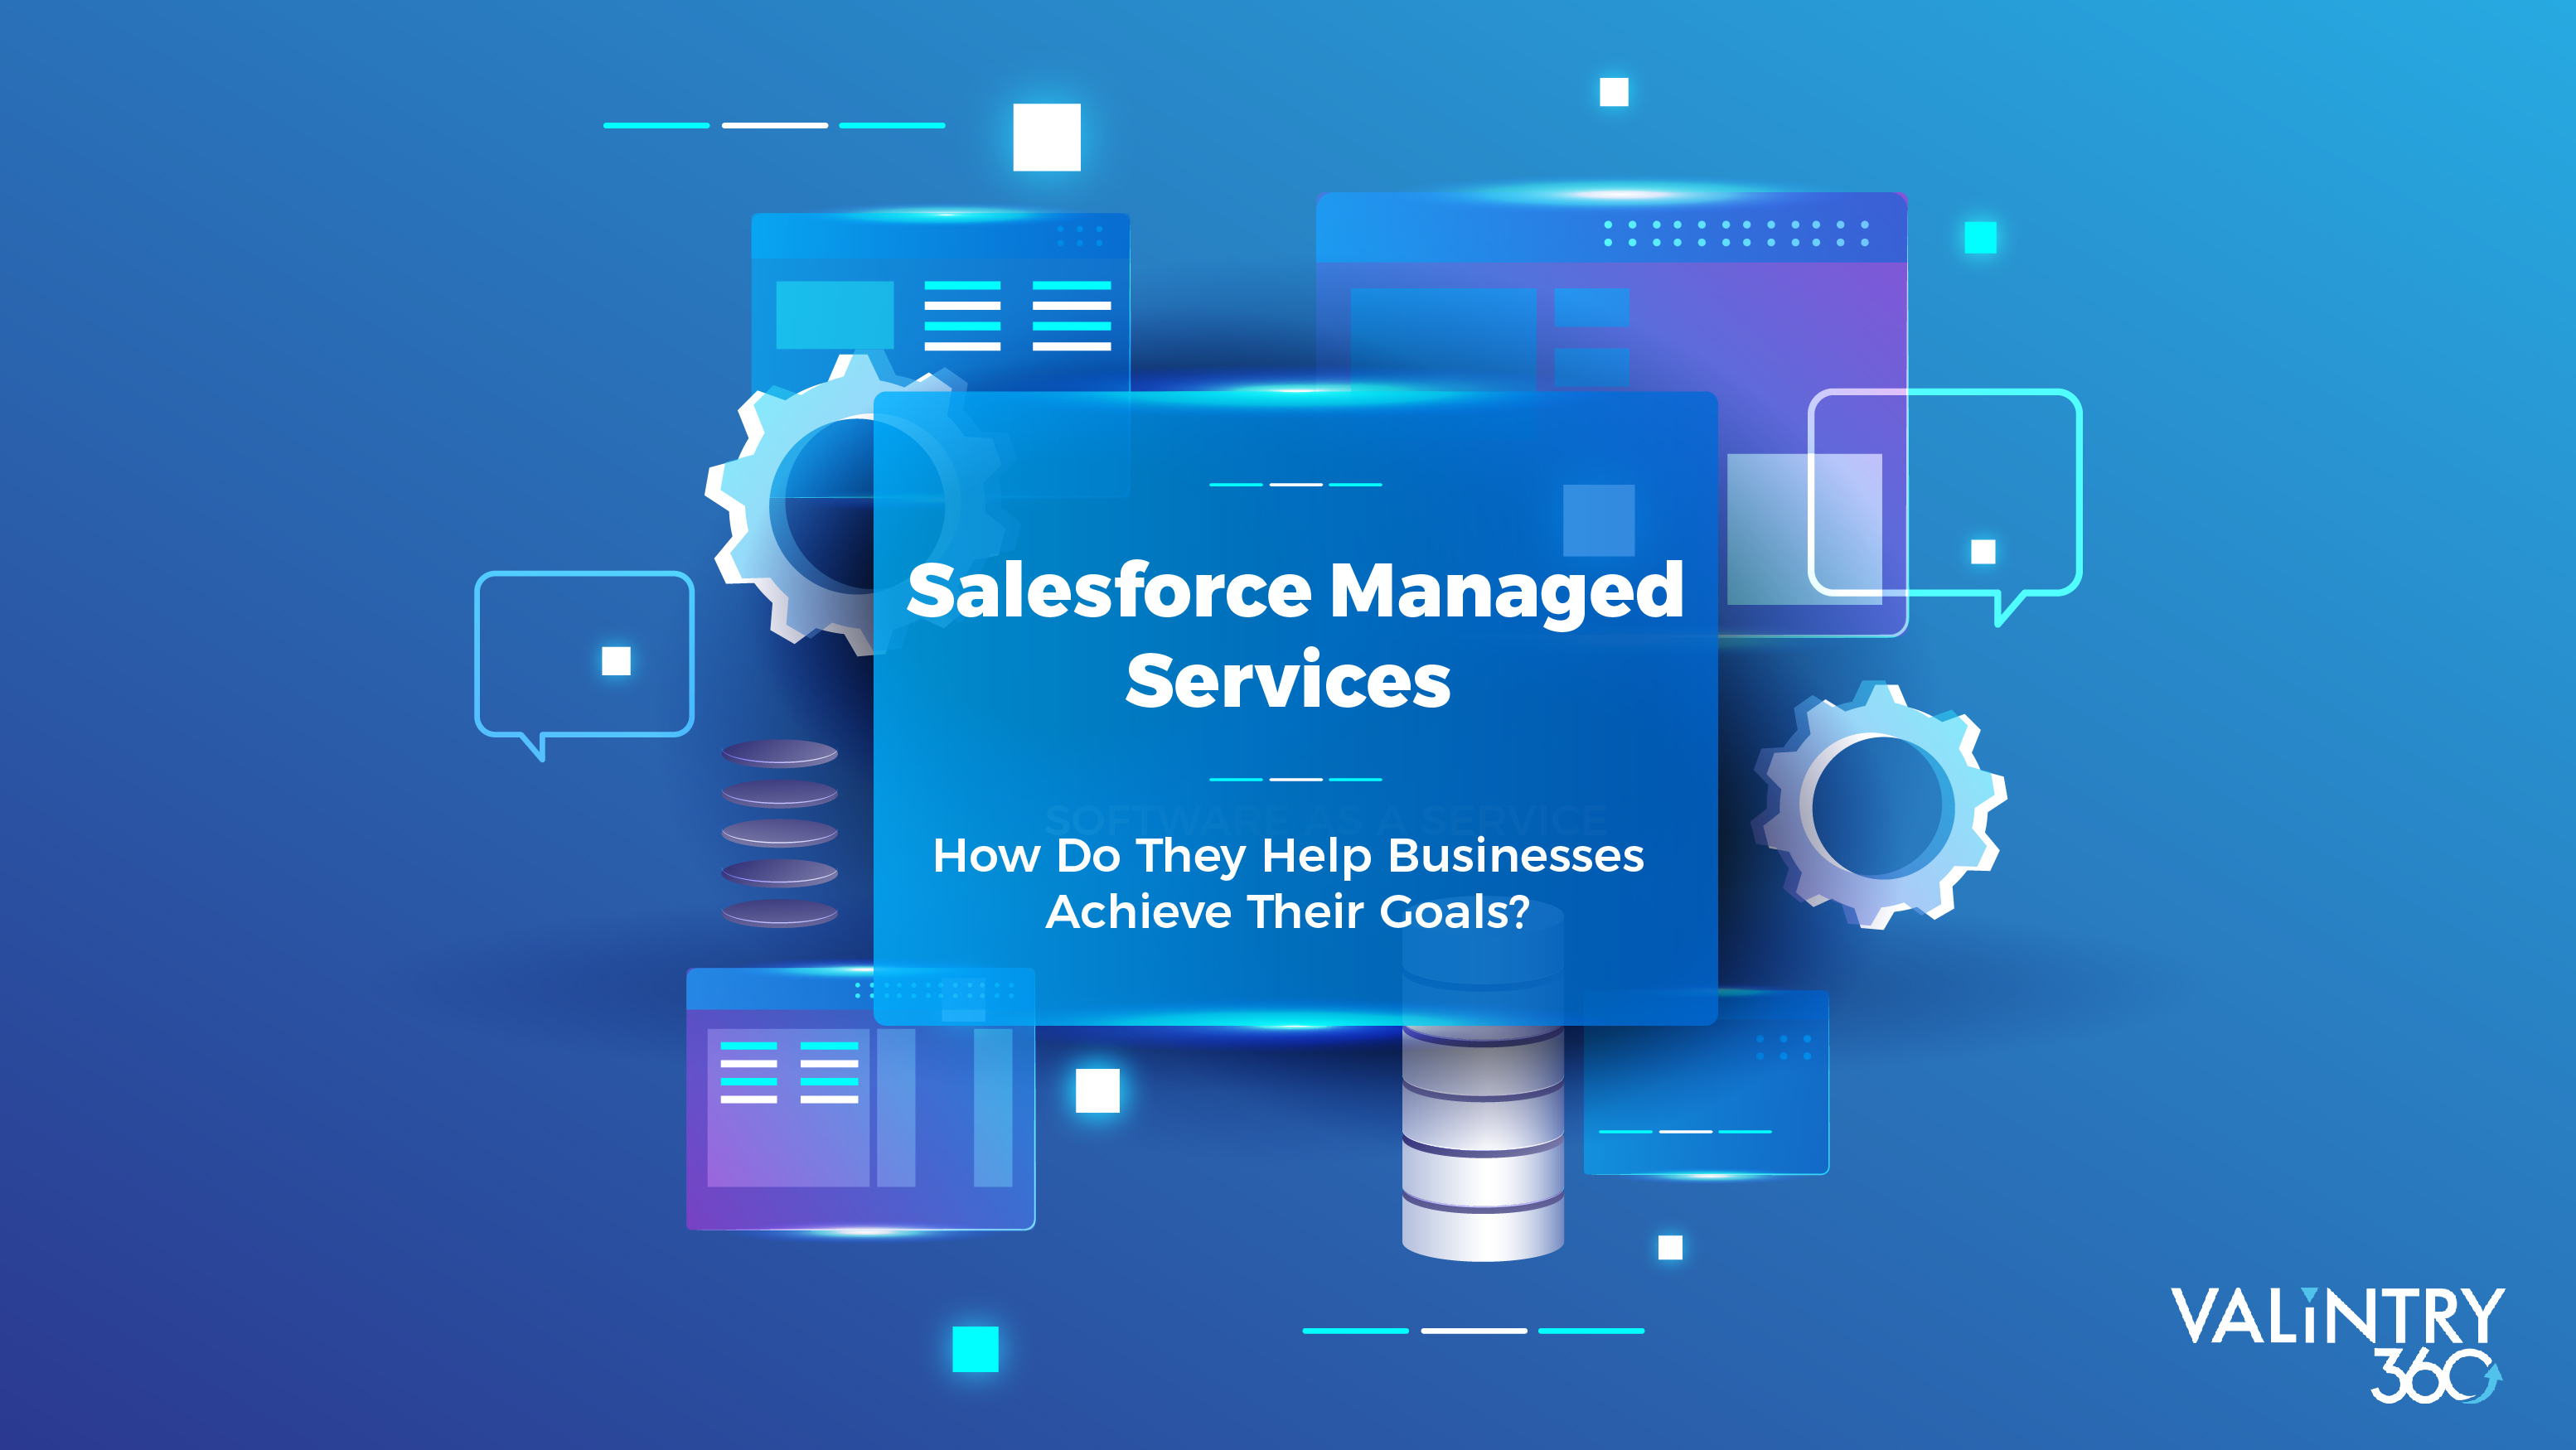 Top Salesforce Managed Services Trends for 2023 and Beyond – VALiNTRY360